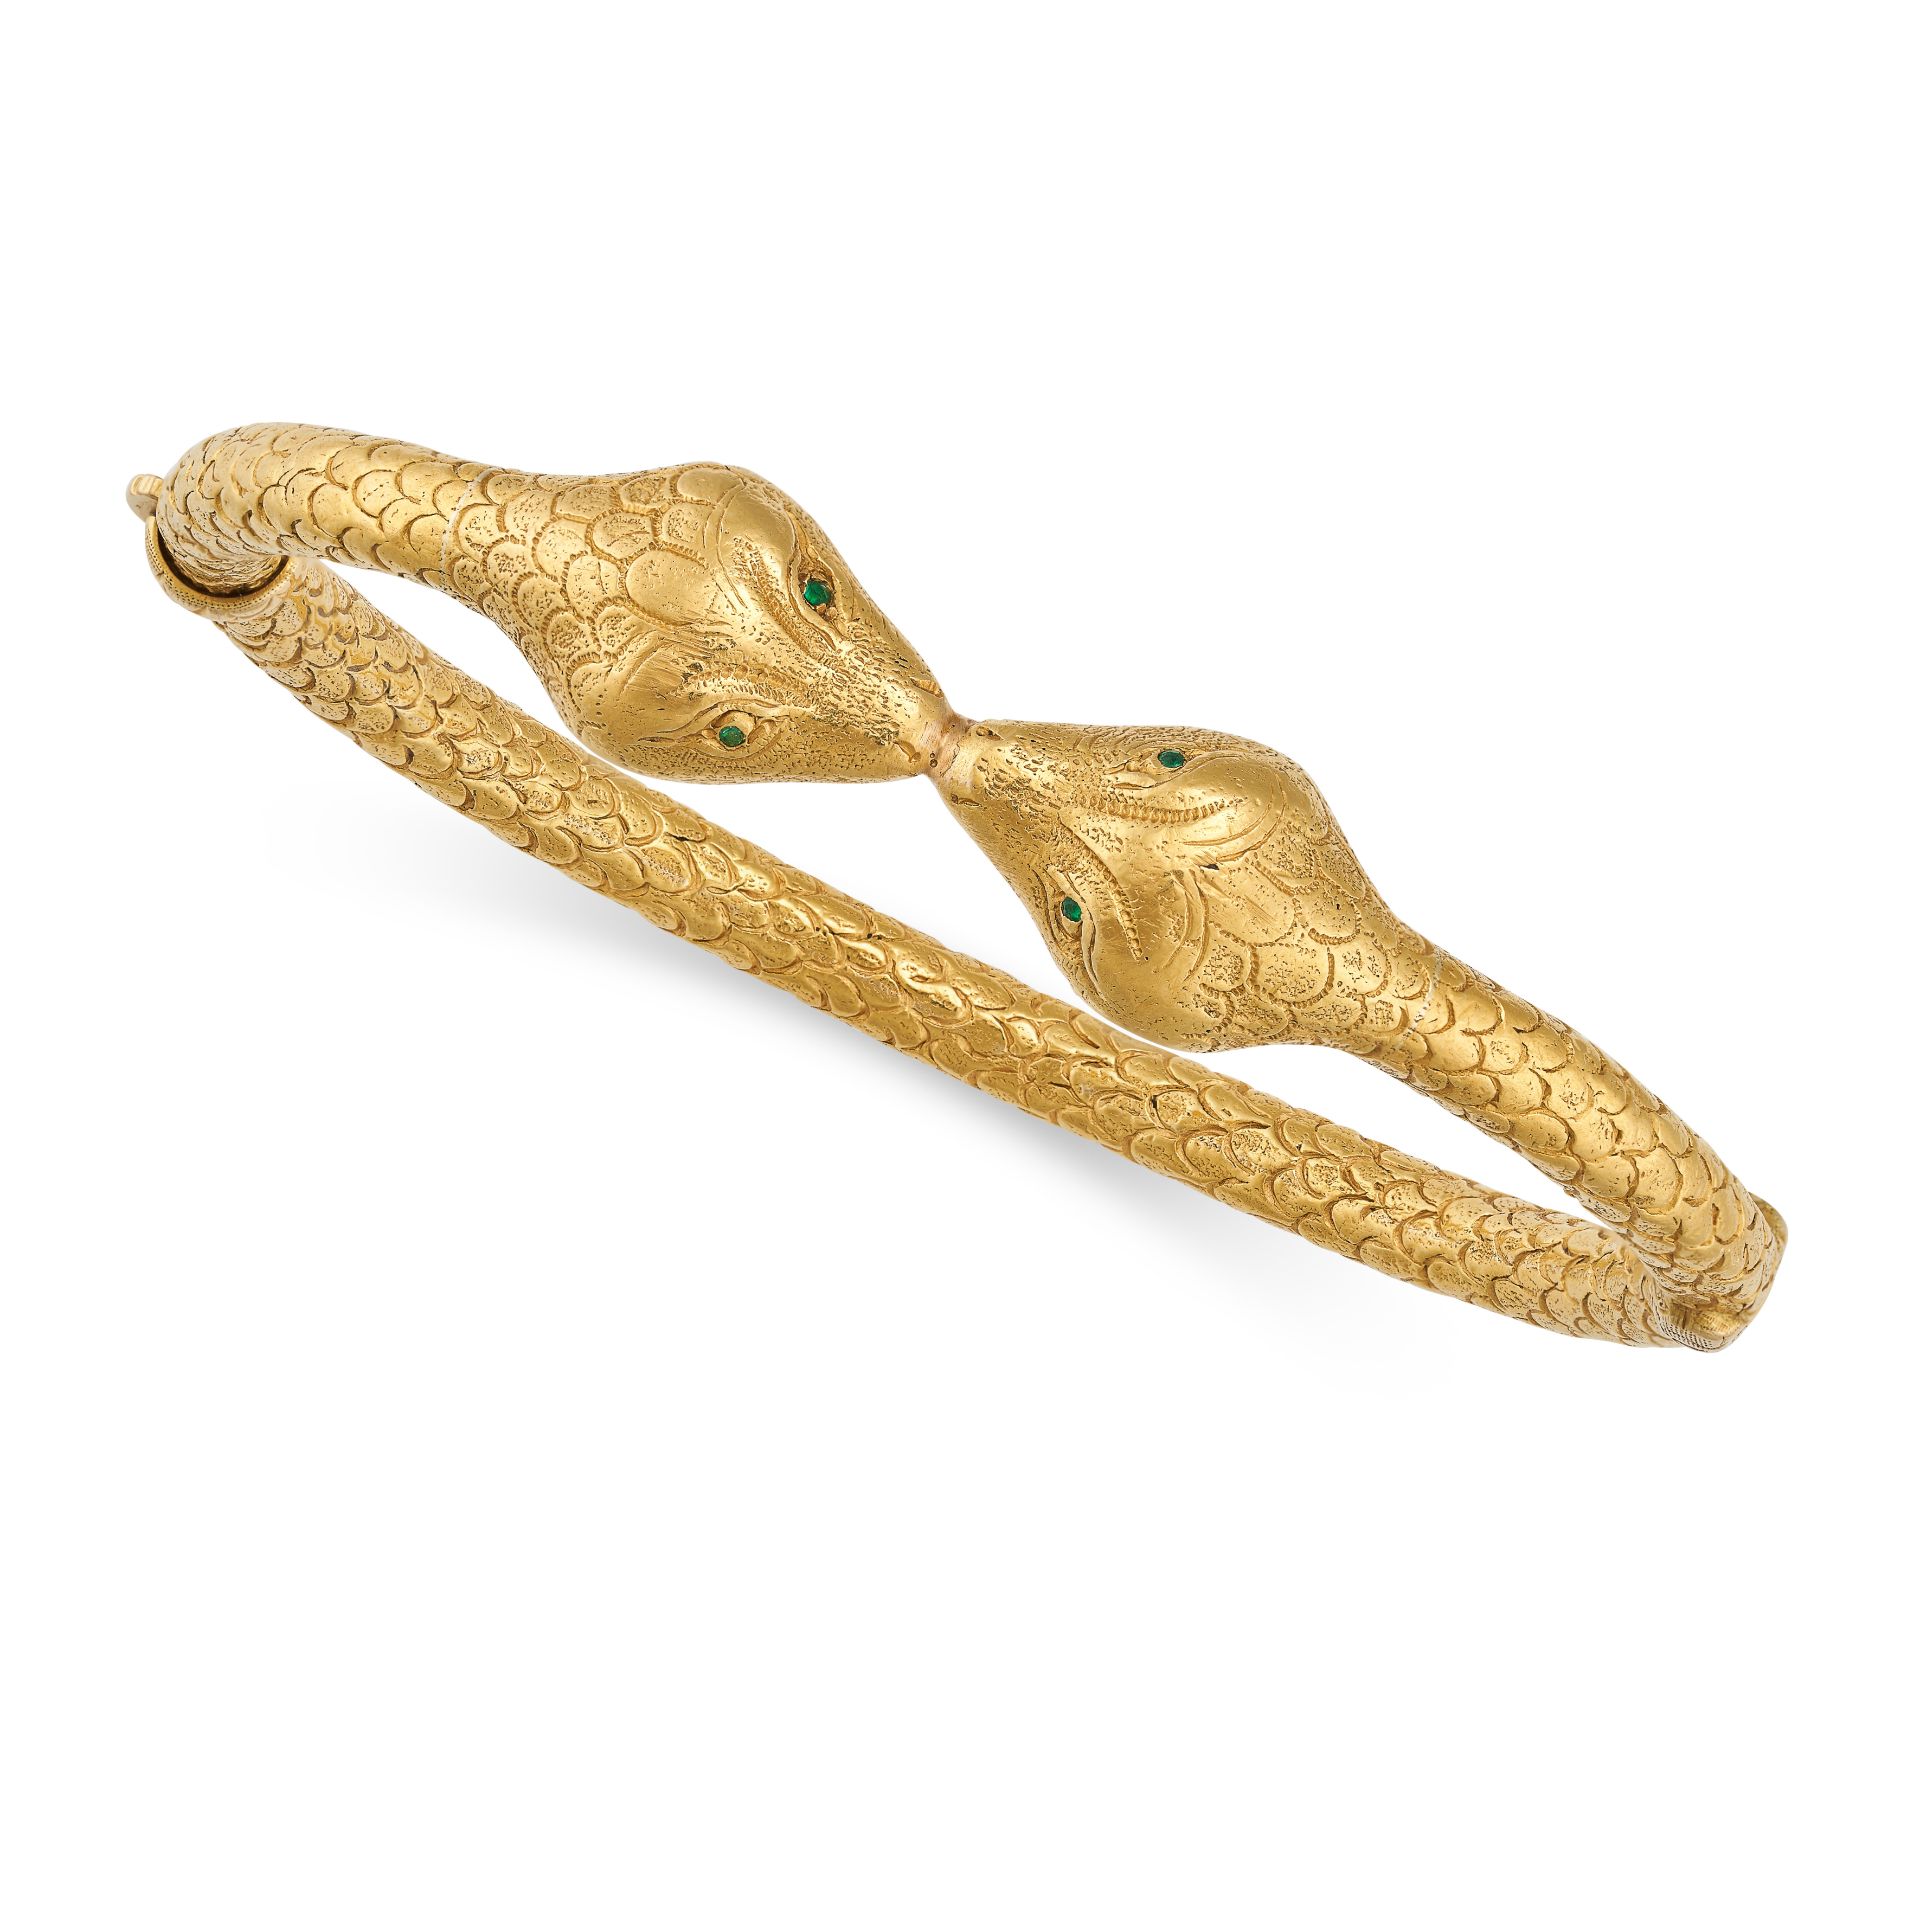 NO RESERVE - AN EMERALD SNAKE BANGLE in high carat yellow gold, modelled as a two headed snake, e...